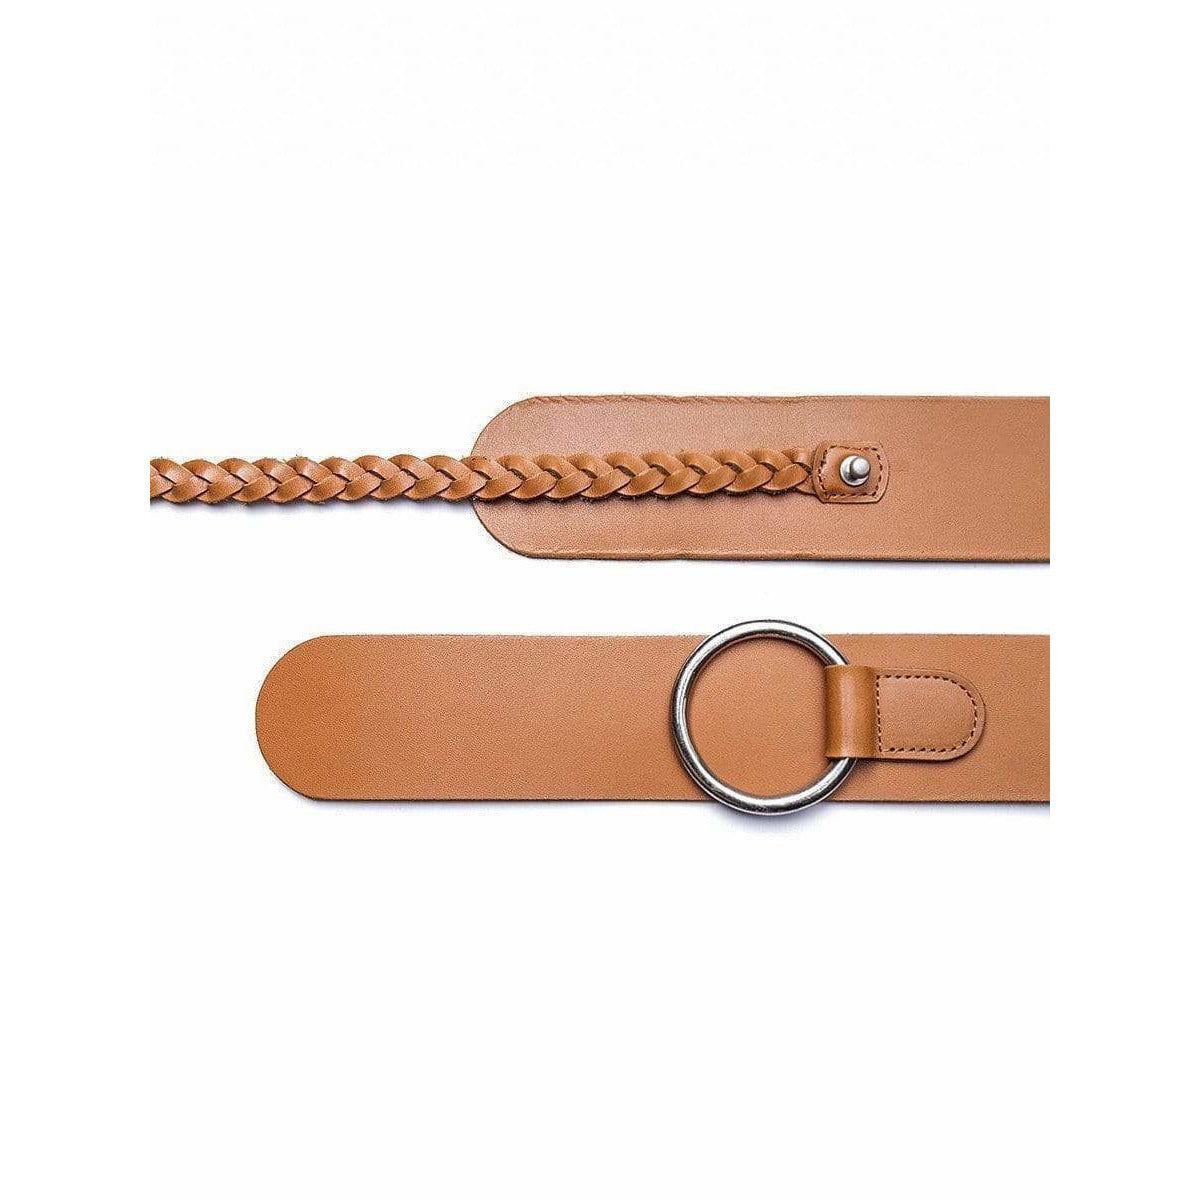 Accessories leather-belt White